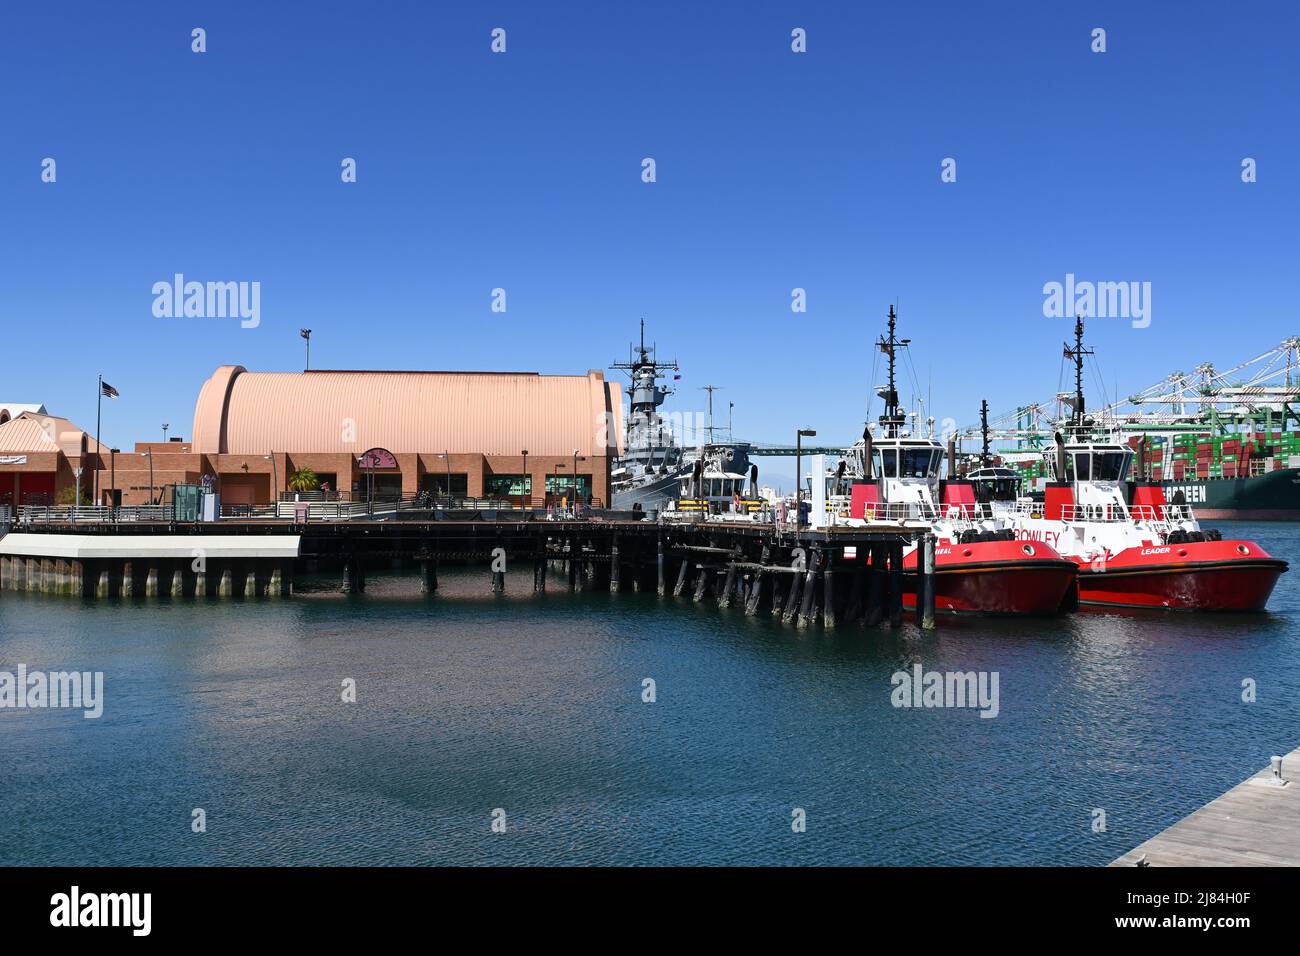 SAN PEDRO, CALIFORNIA - 11 MAY 2022: Fire Station 112 and fire boats in the Port of Los Angeles. Stock Photo